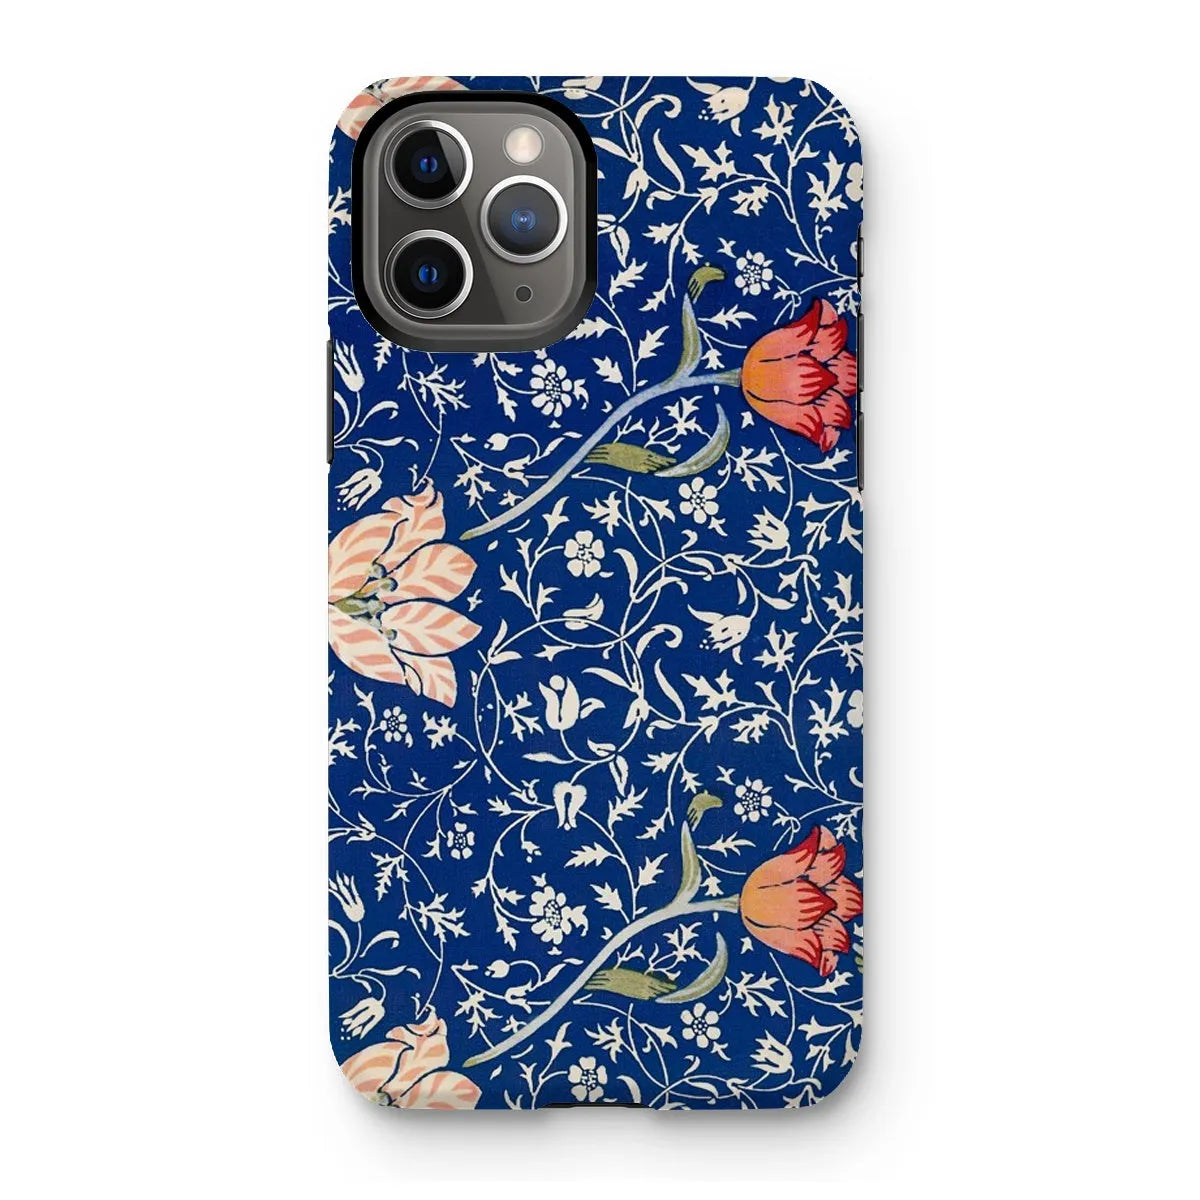 Medway - Floral Aesthetic Art Phone Case - William Morris - Iphone 11 Pro / Matte - Mobile Phone Cases - Aesthetic Art